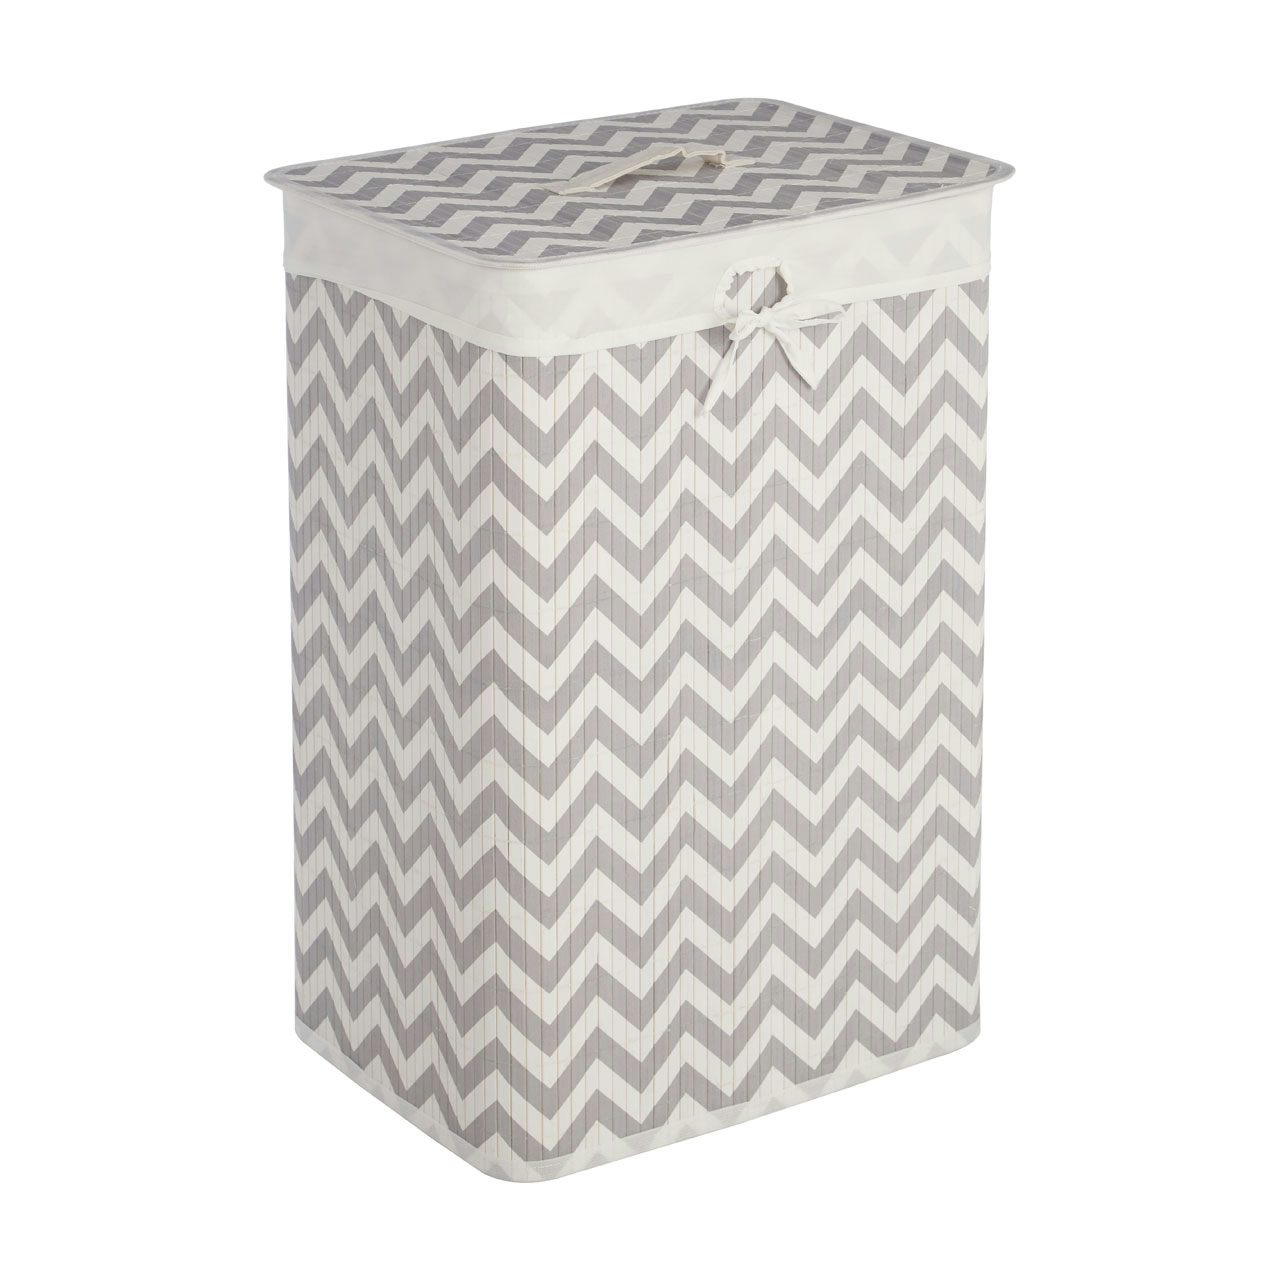 Accents Natural bamboo white and grey chevron rectangular laundry basket